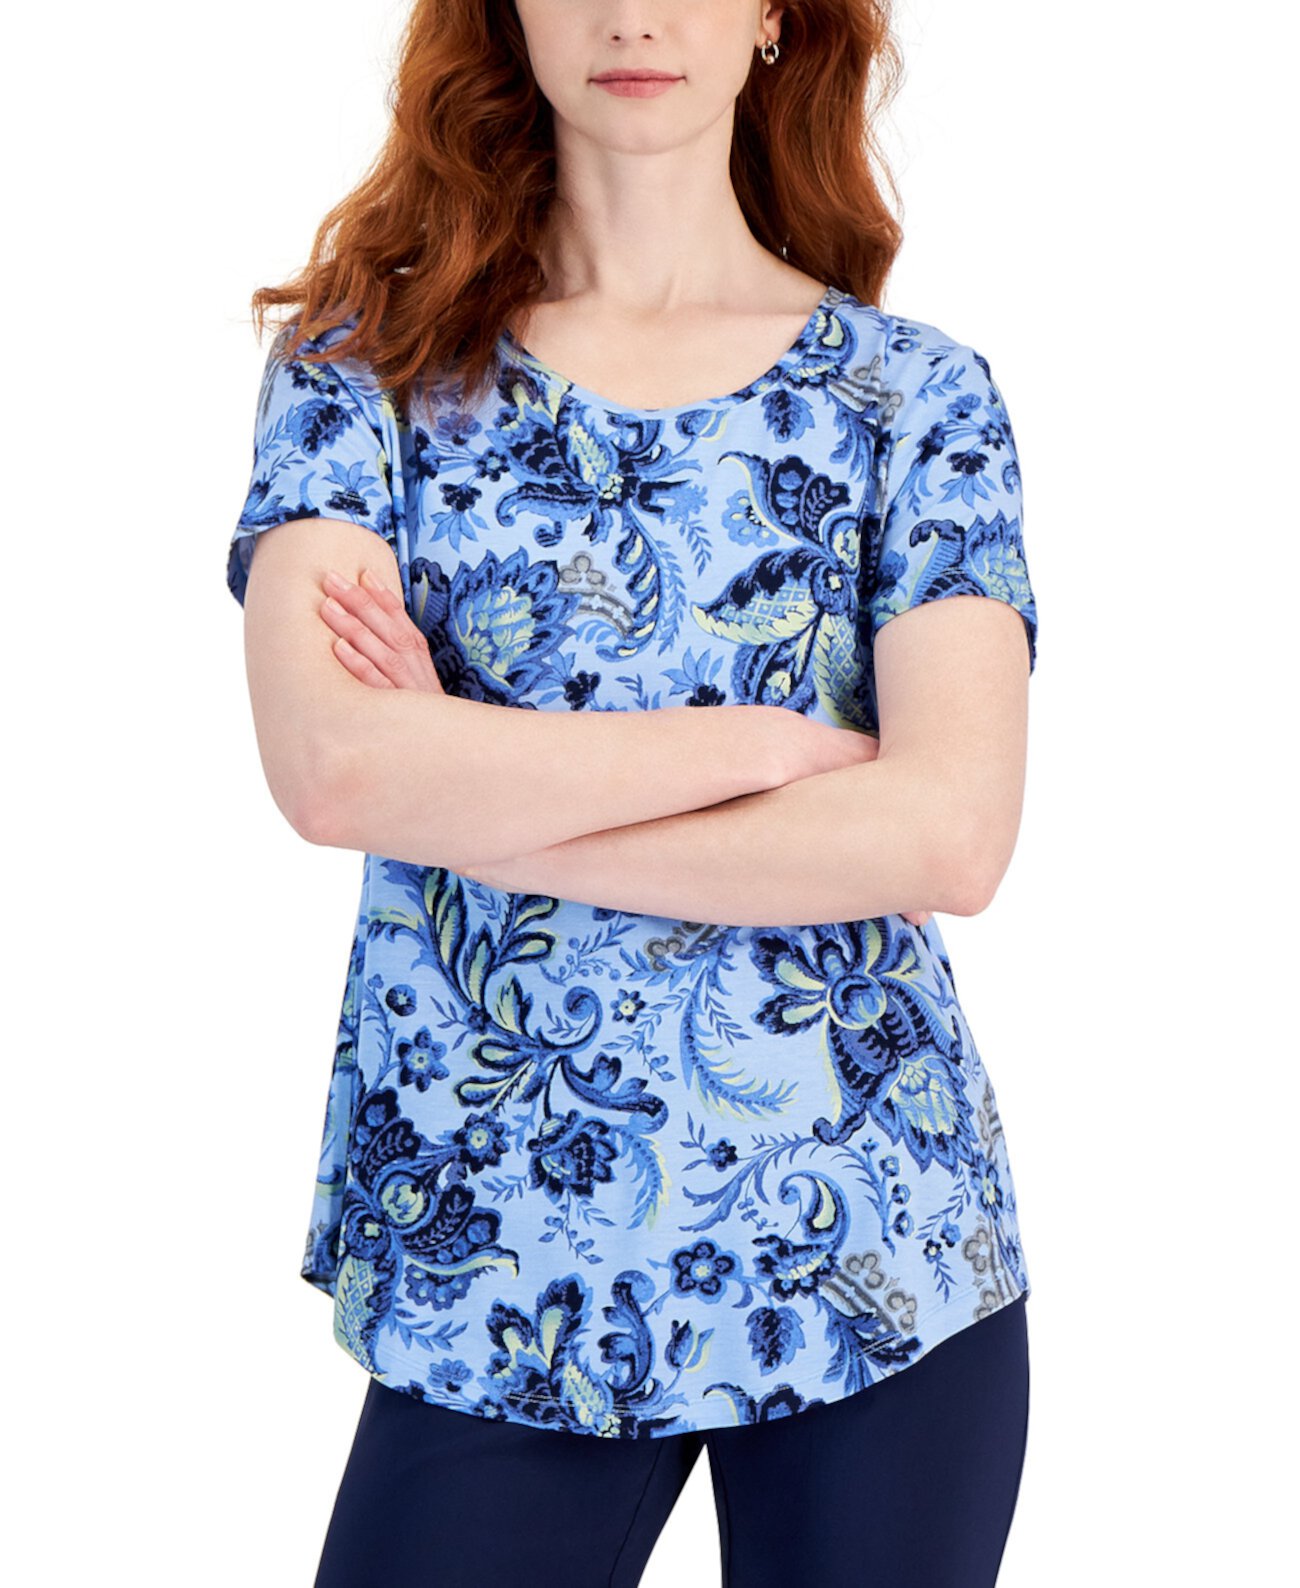 Women's Printed Knit Short-Sleeve Top, Created for Macy's J&M Collection